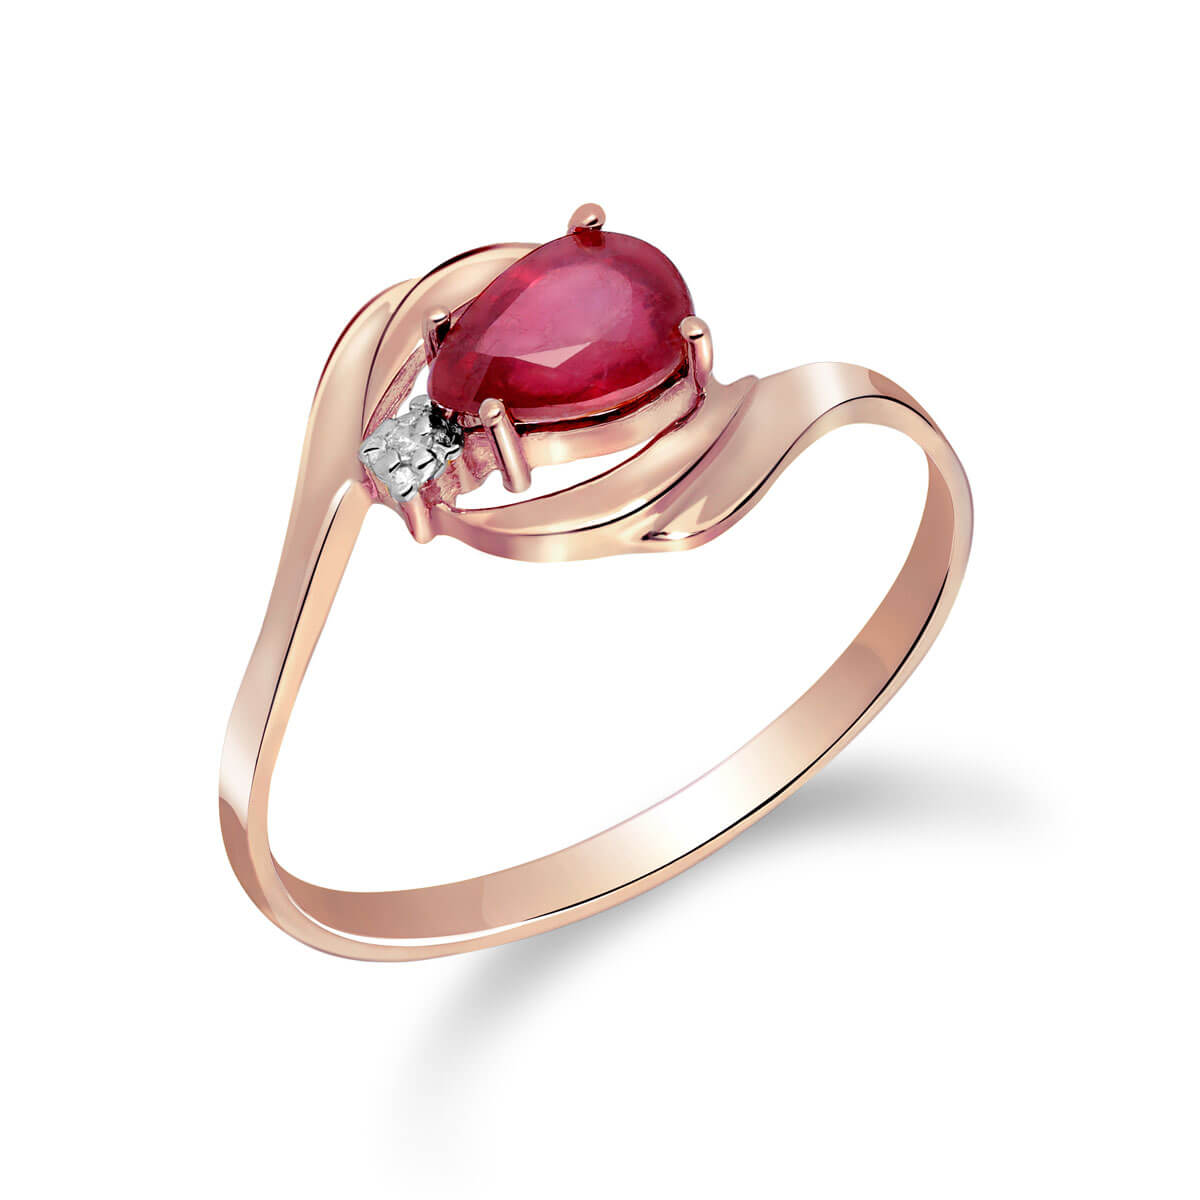 Ruby & Diamond Flare Ring in 9ct Rose Gold